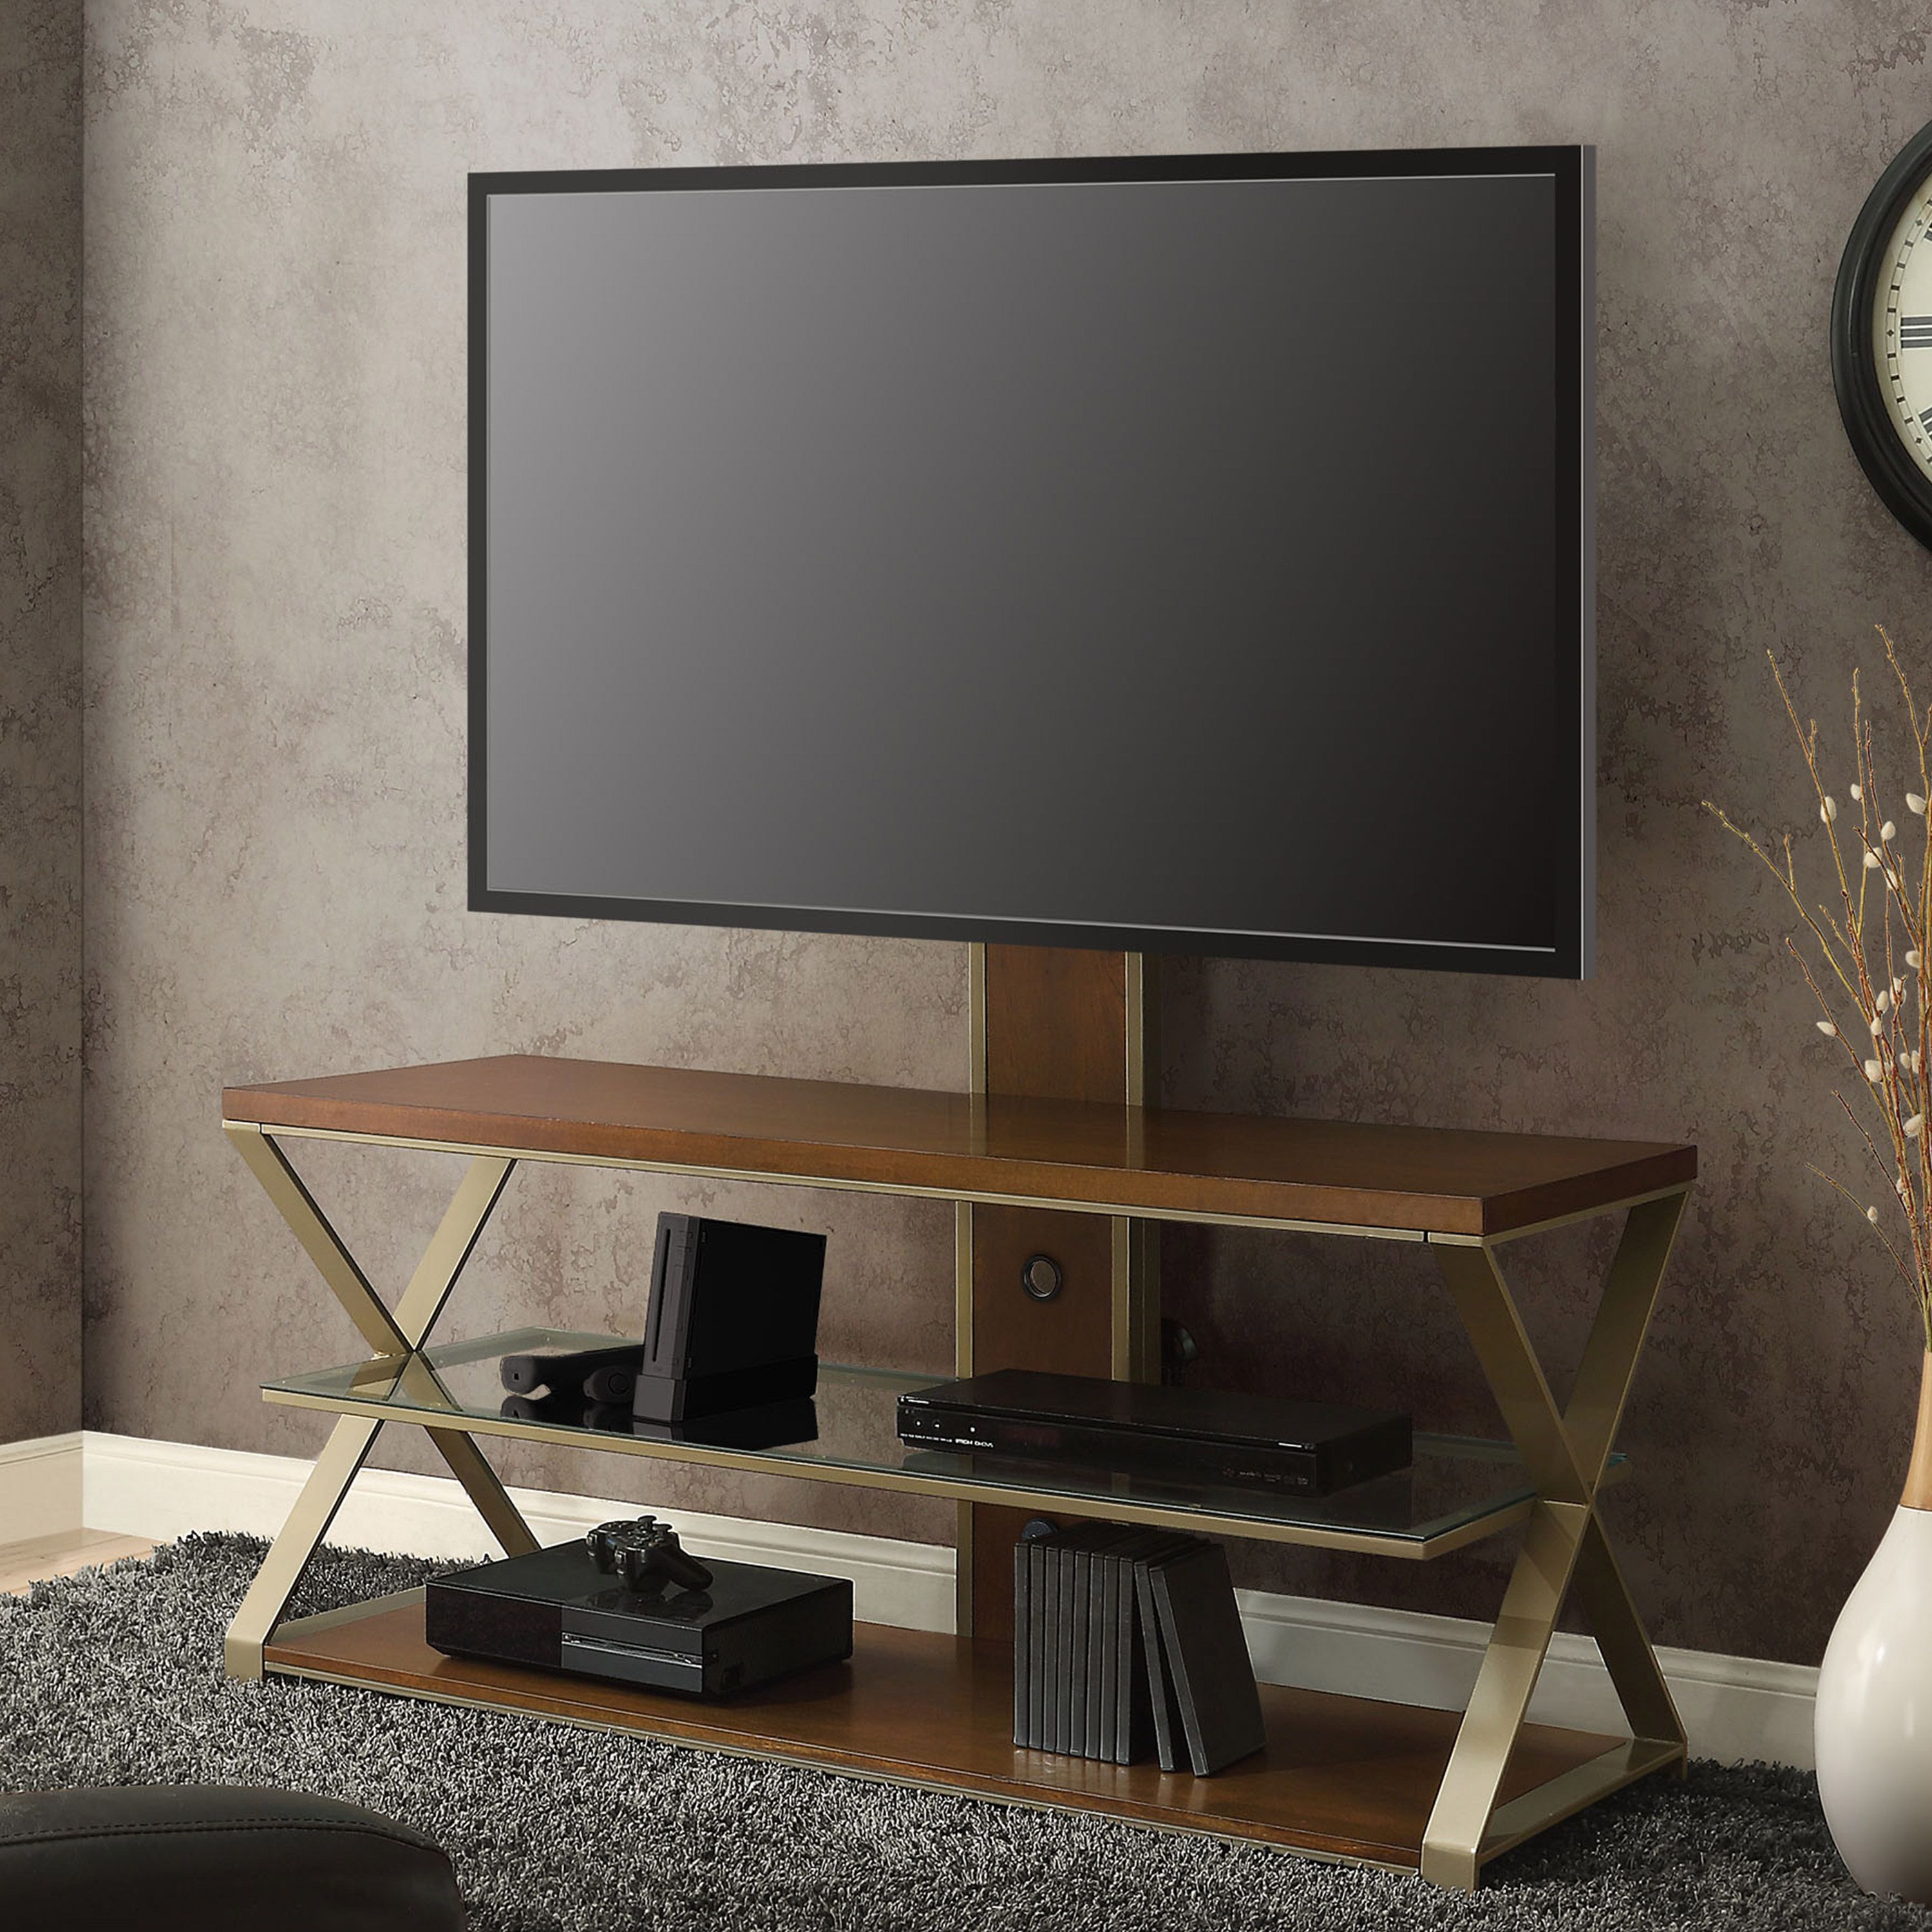 Jaxon 3 In 1 Television Stand For Tvs Up To 70", With 3 Display Within Jaxon 65 Inch Tv Stands (View 15 of 20)